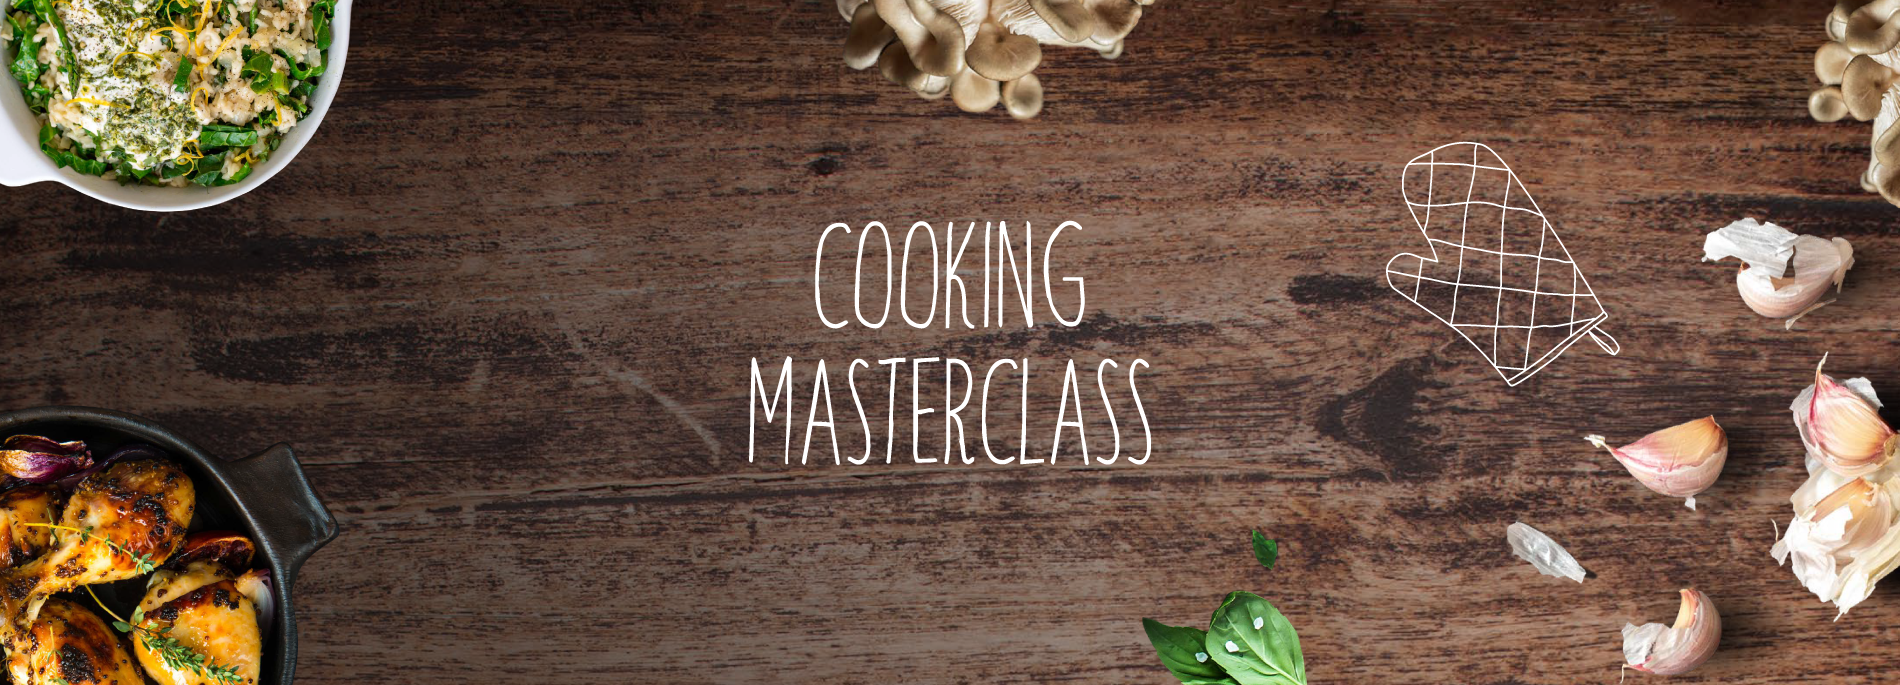 Cooking Masterclass